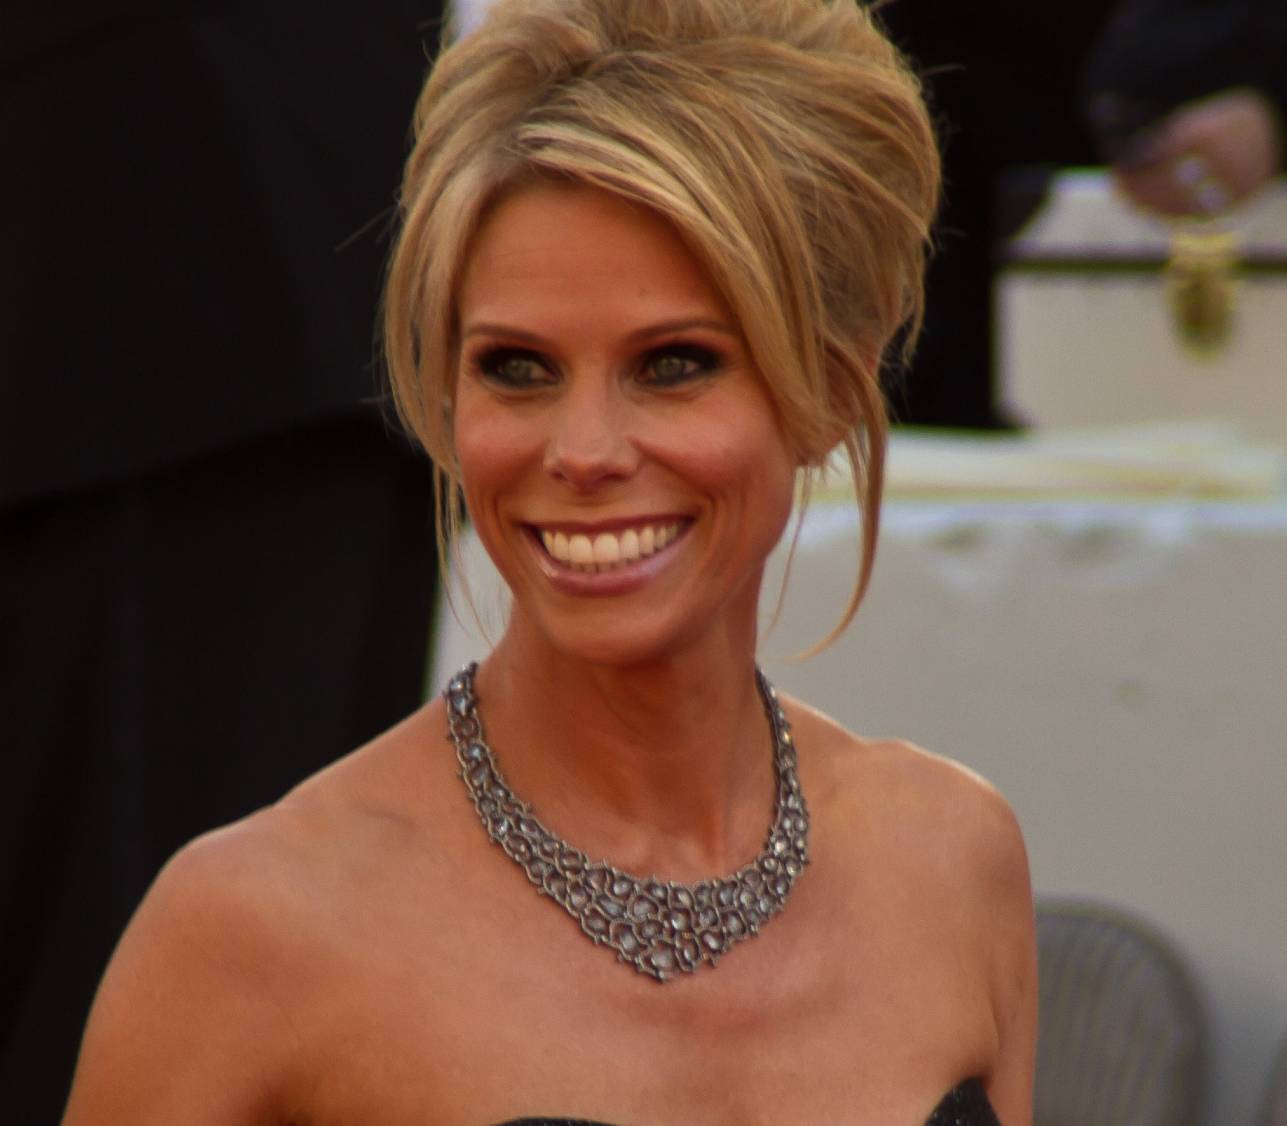 Image of a comedian, producer, and film director, Cheryl Hines